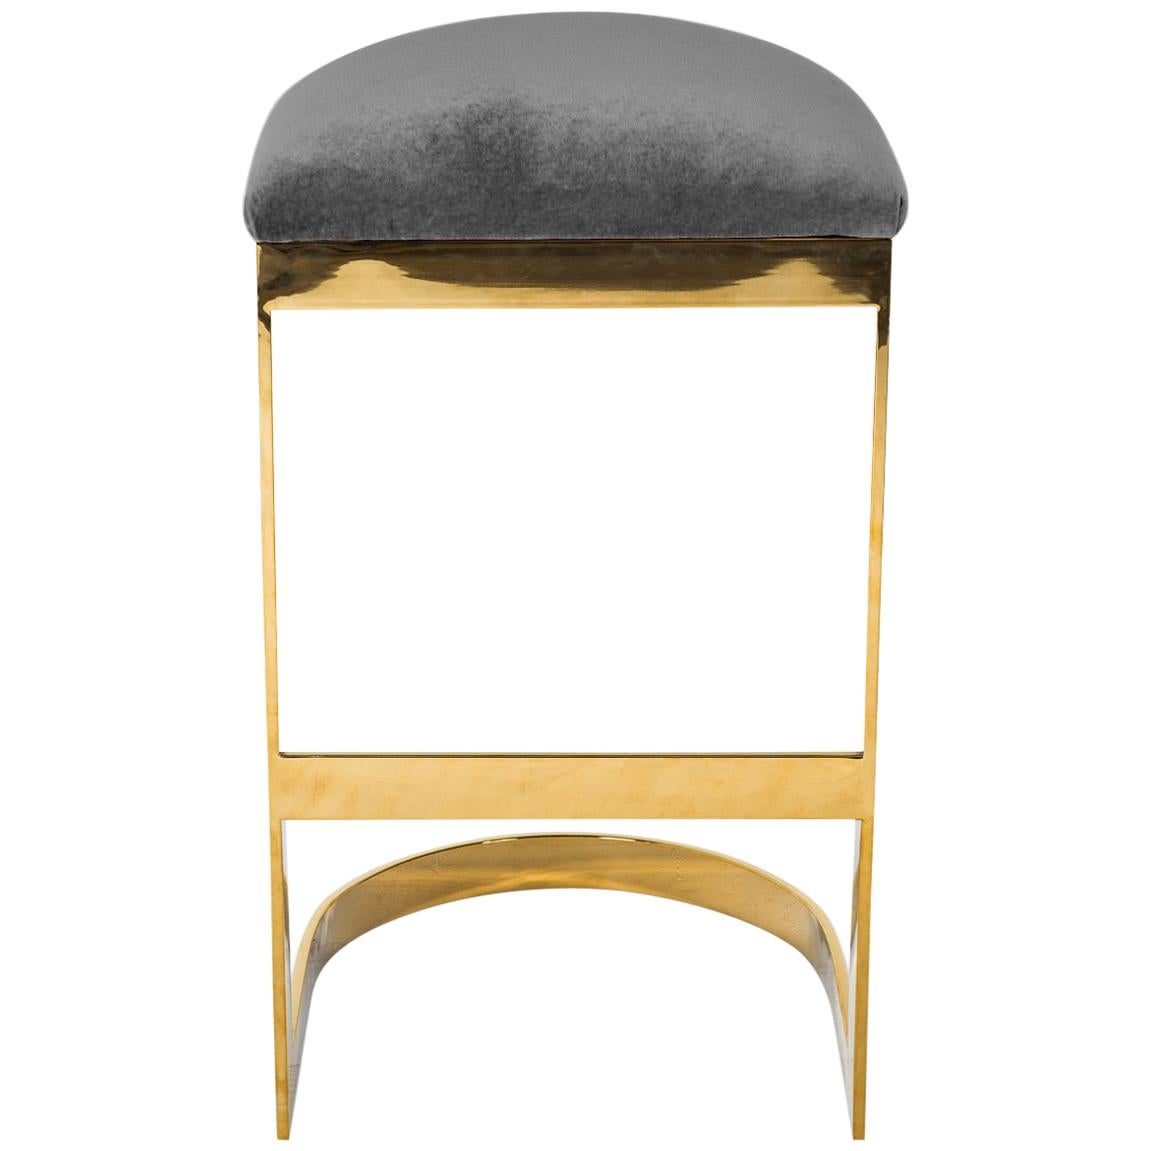 Modern Style Backless Bar Stool in Velvet with a Polished Solid Brass Frame